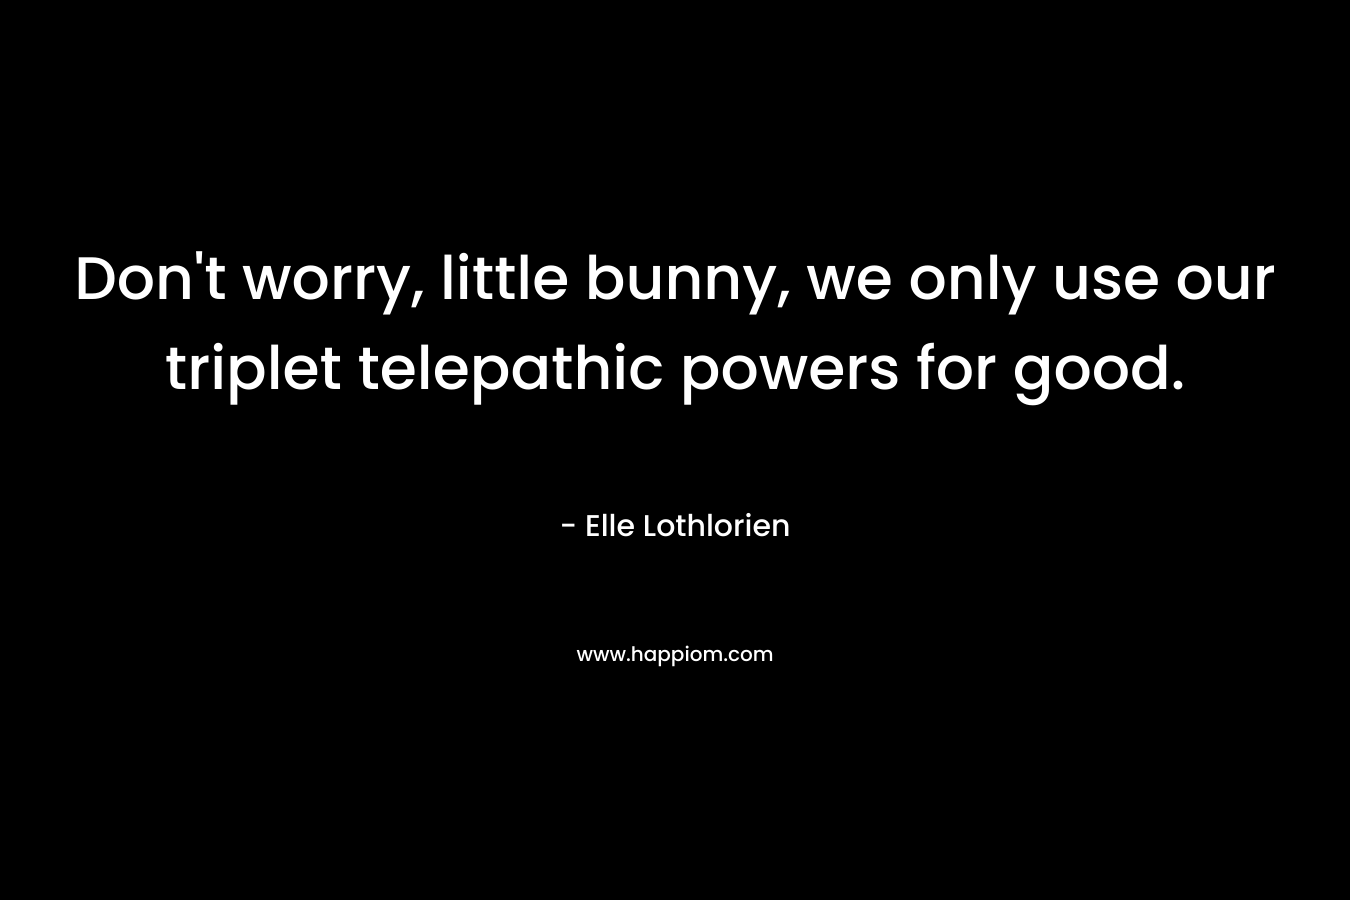 Don’t worry, little bunny, we only use our triplet telepathic powers for good. – Elle Lothlorien